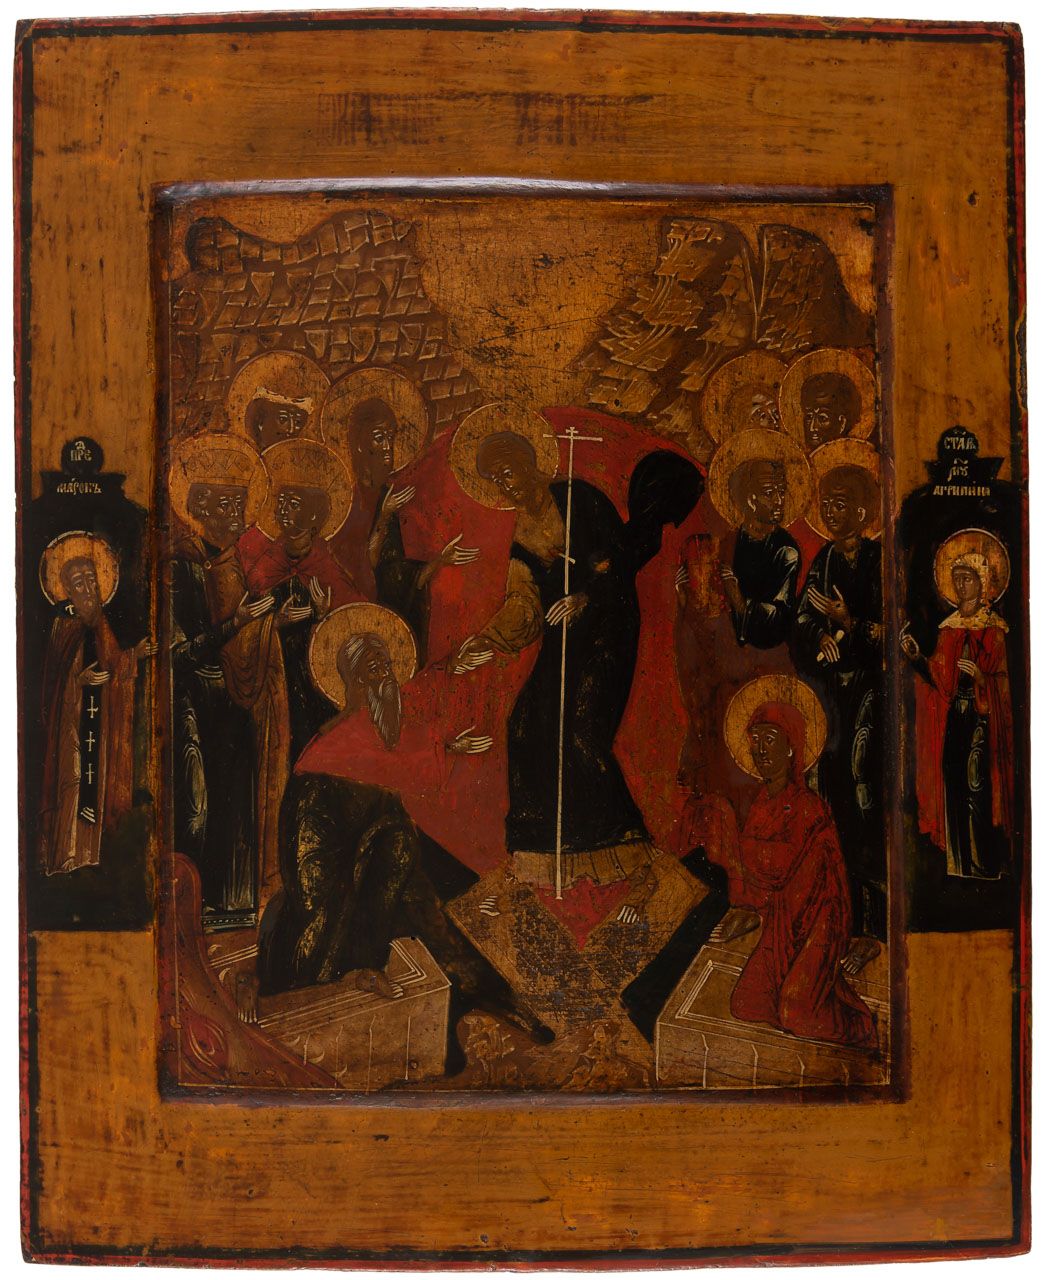 HADESFAHRT CHRISTI RUSSIAN EASTER ICON SHOWING THE DESCENT OF CHRIST INTO HADES &hellip;